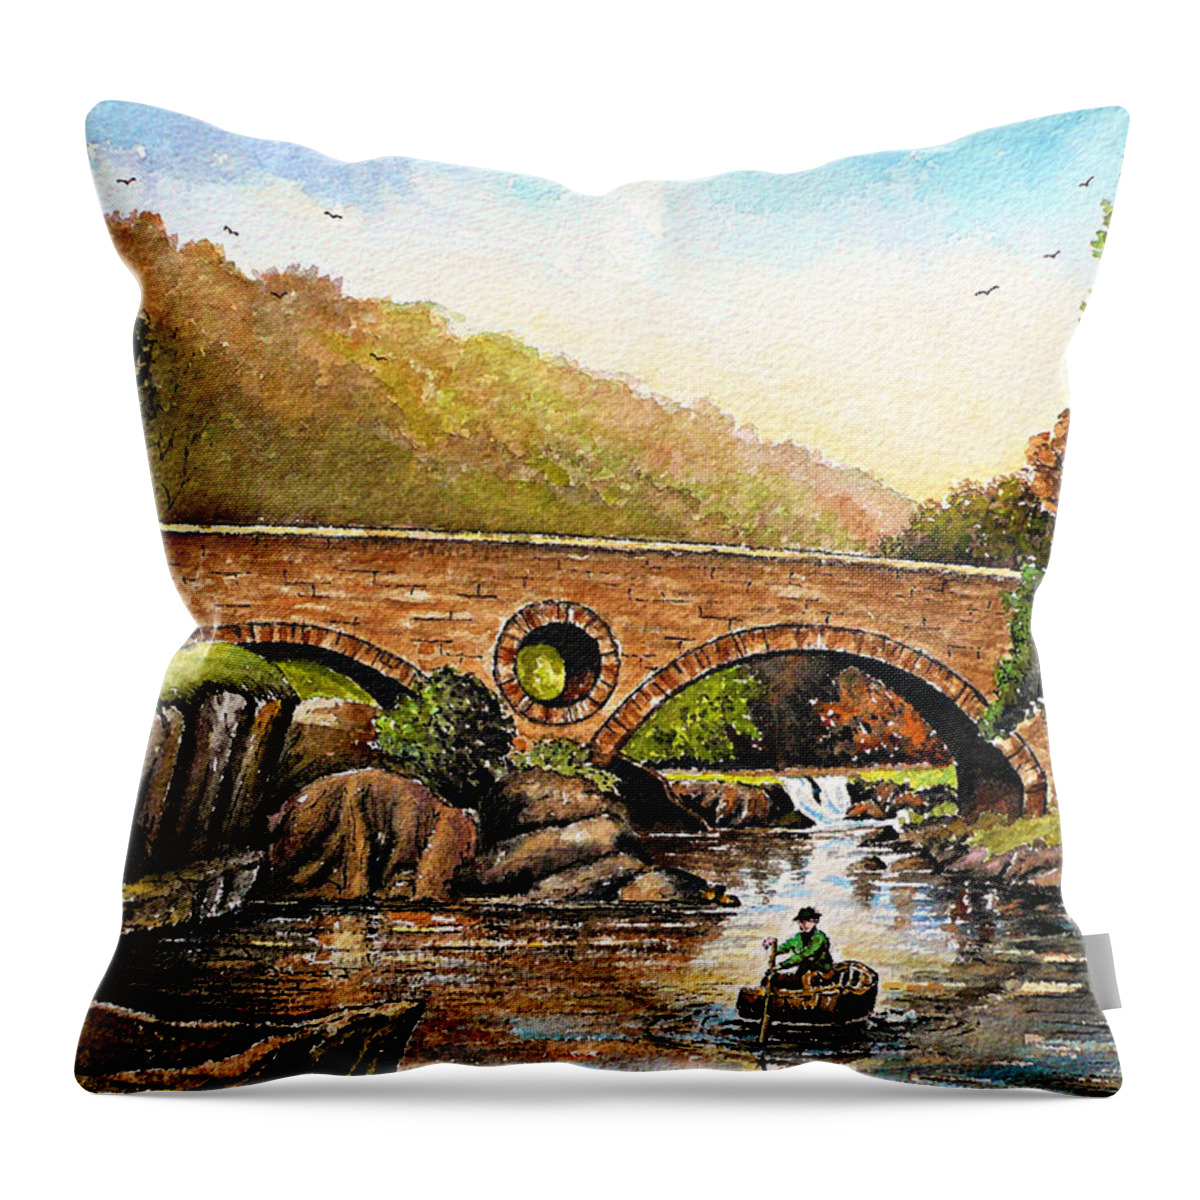 Cenarth Throw Pillow featuring the painting Coracle fishing Cenarth by Andrew Read